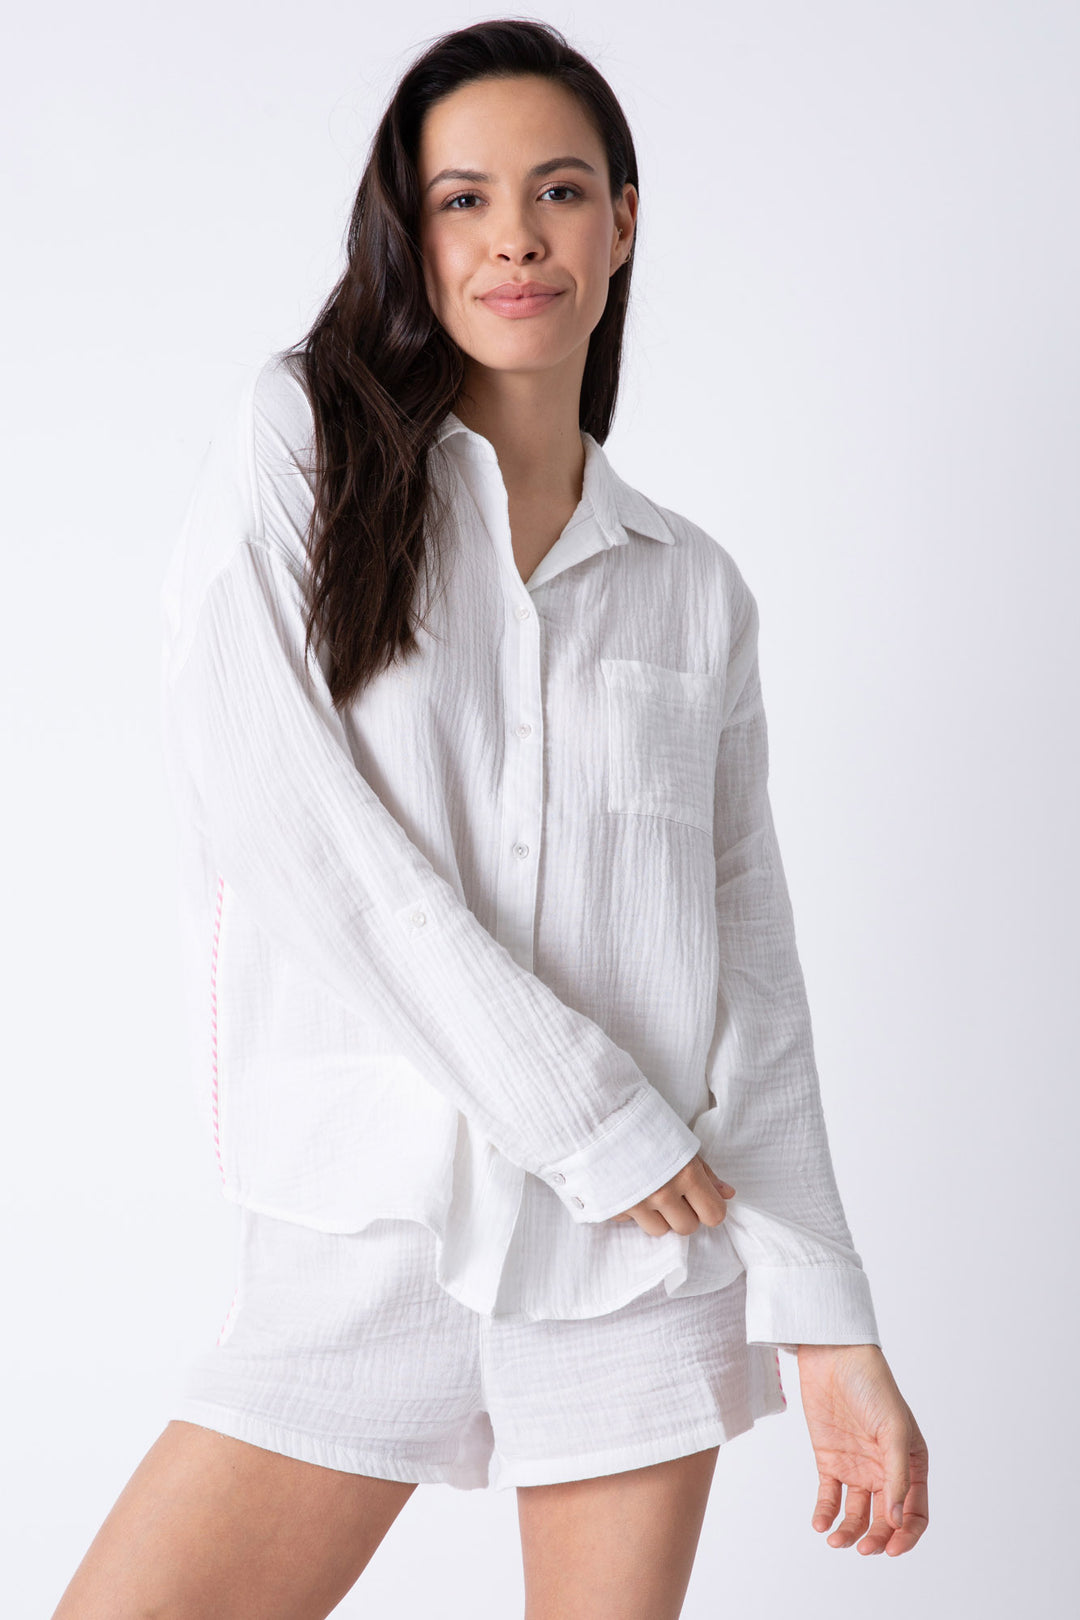 Cotton gauze women's button-down collared shirt in solid ivory